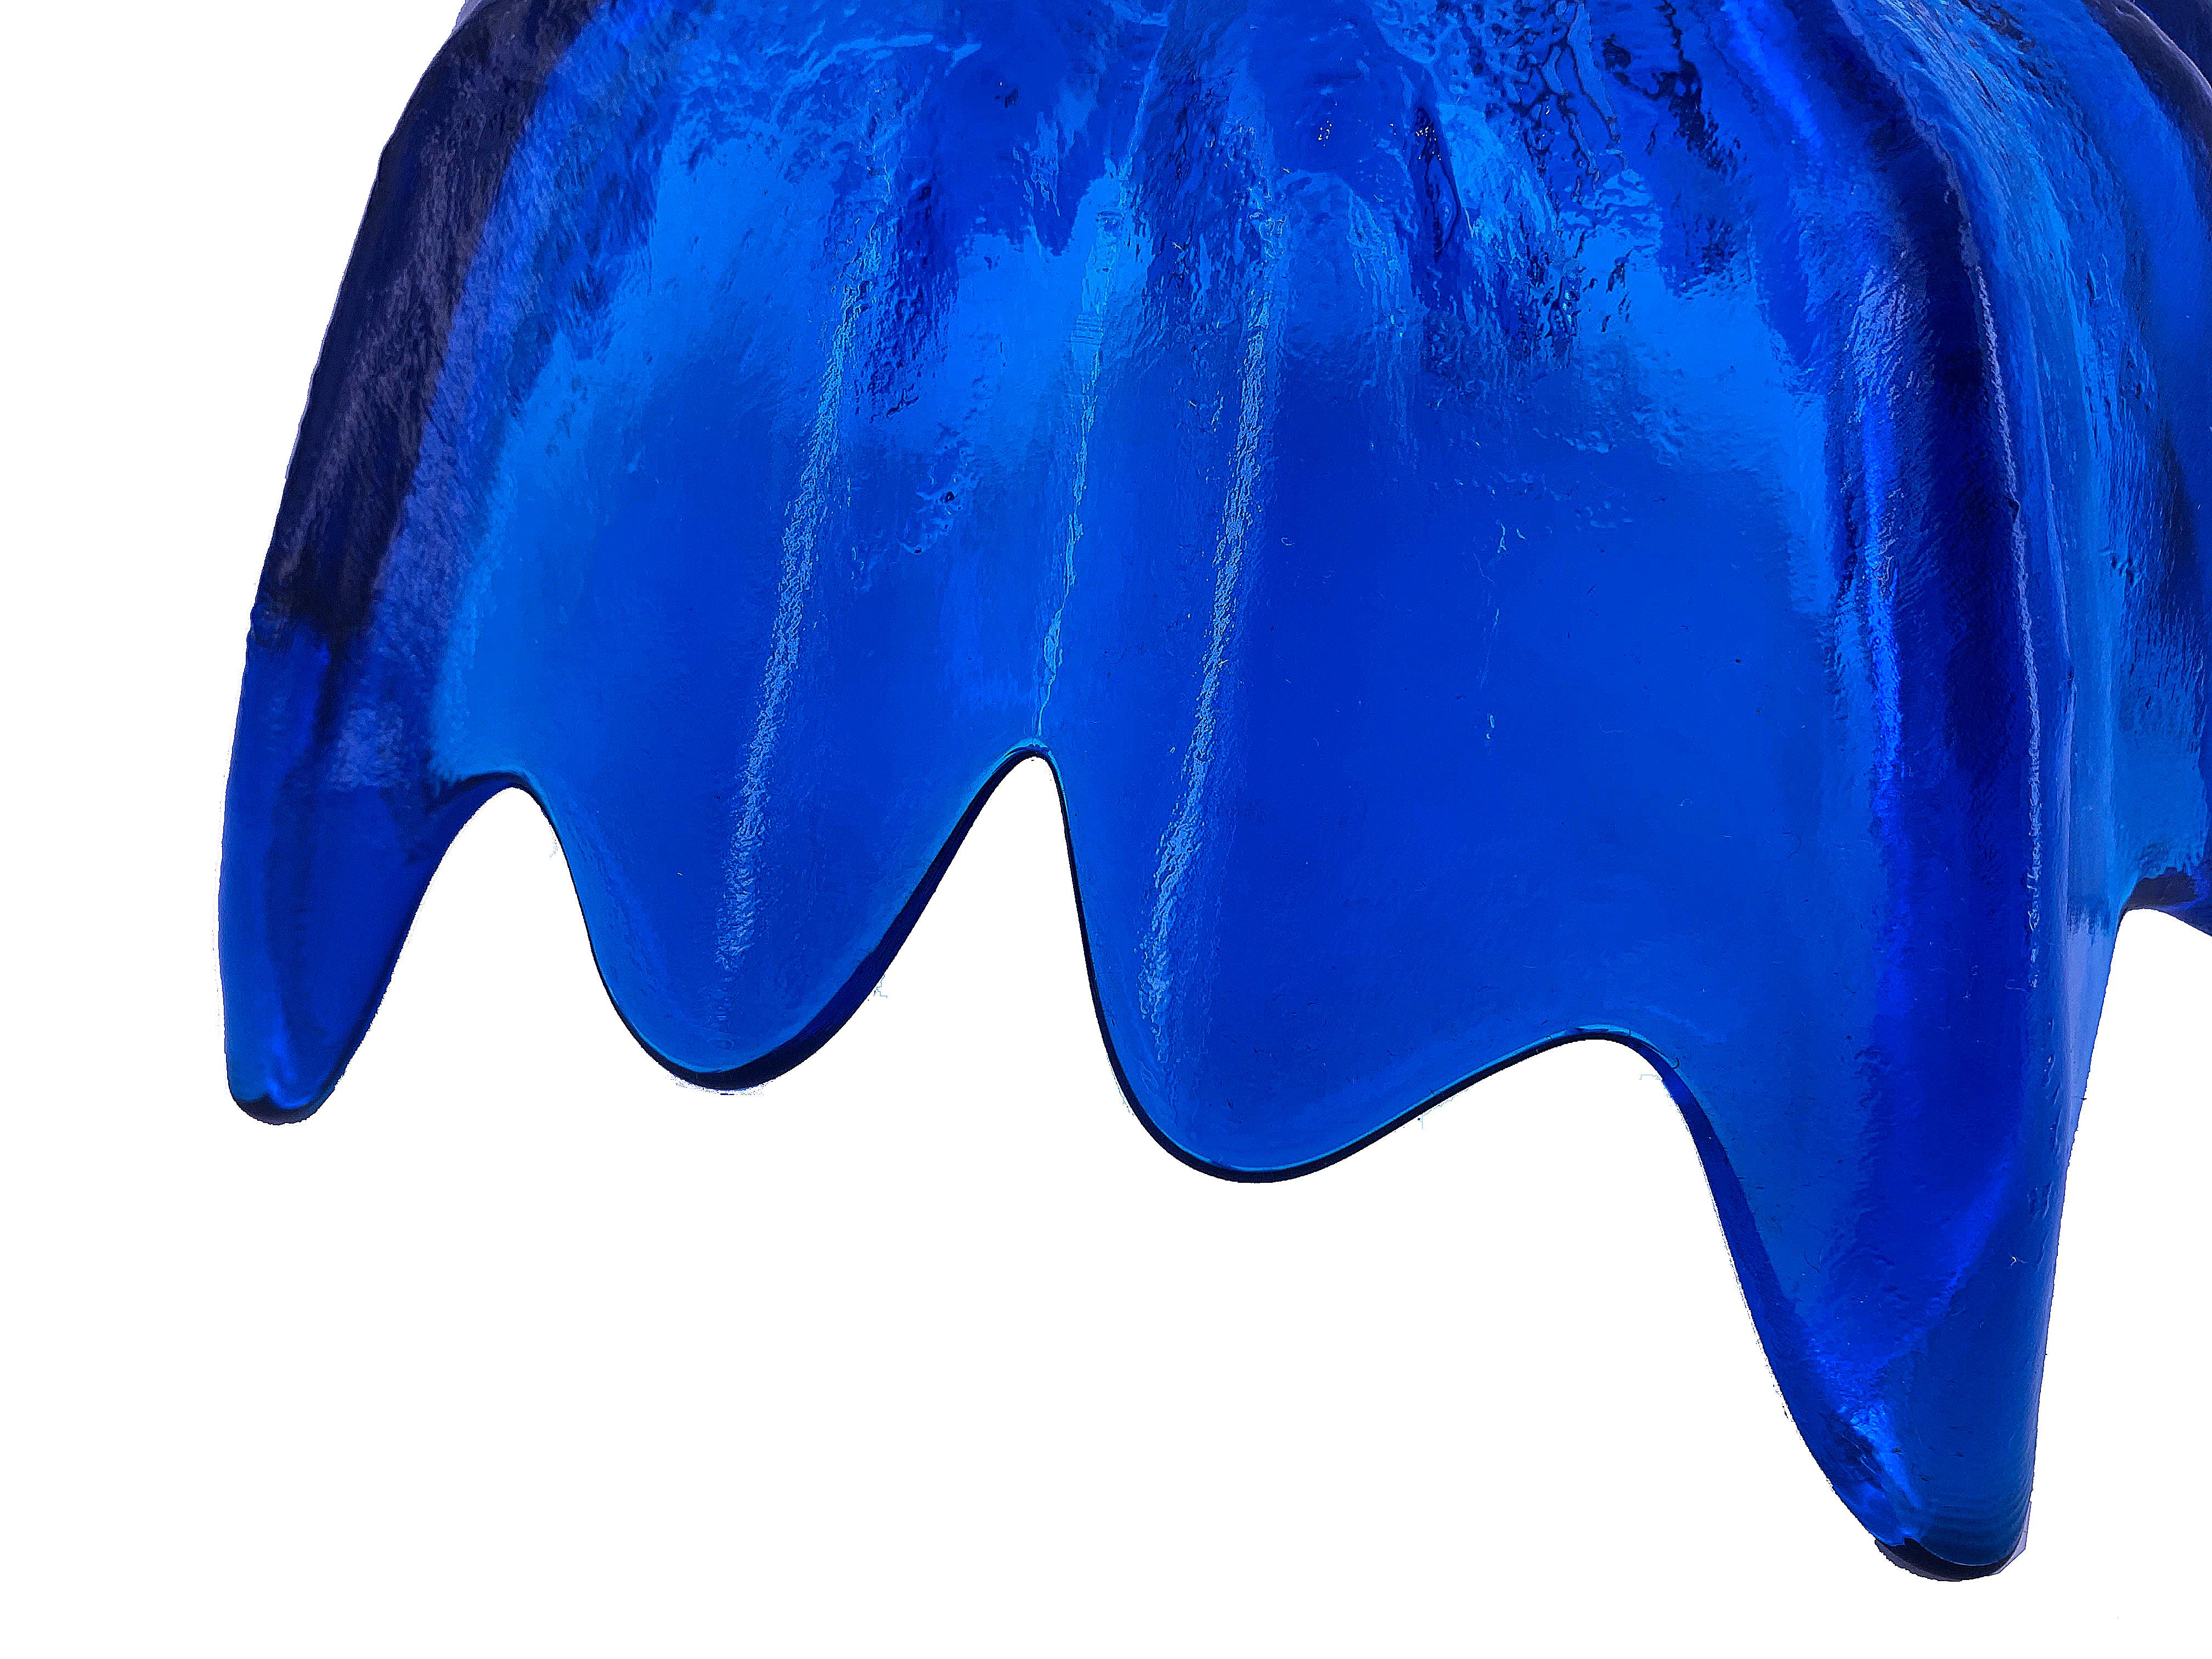 Bright blue glass bowl or centerpiece. This bow is has a beautiful color, shape, and texture.